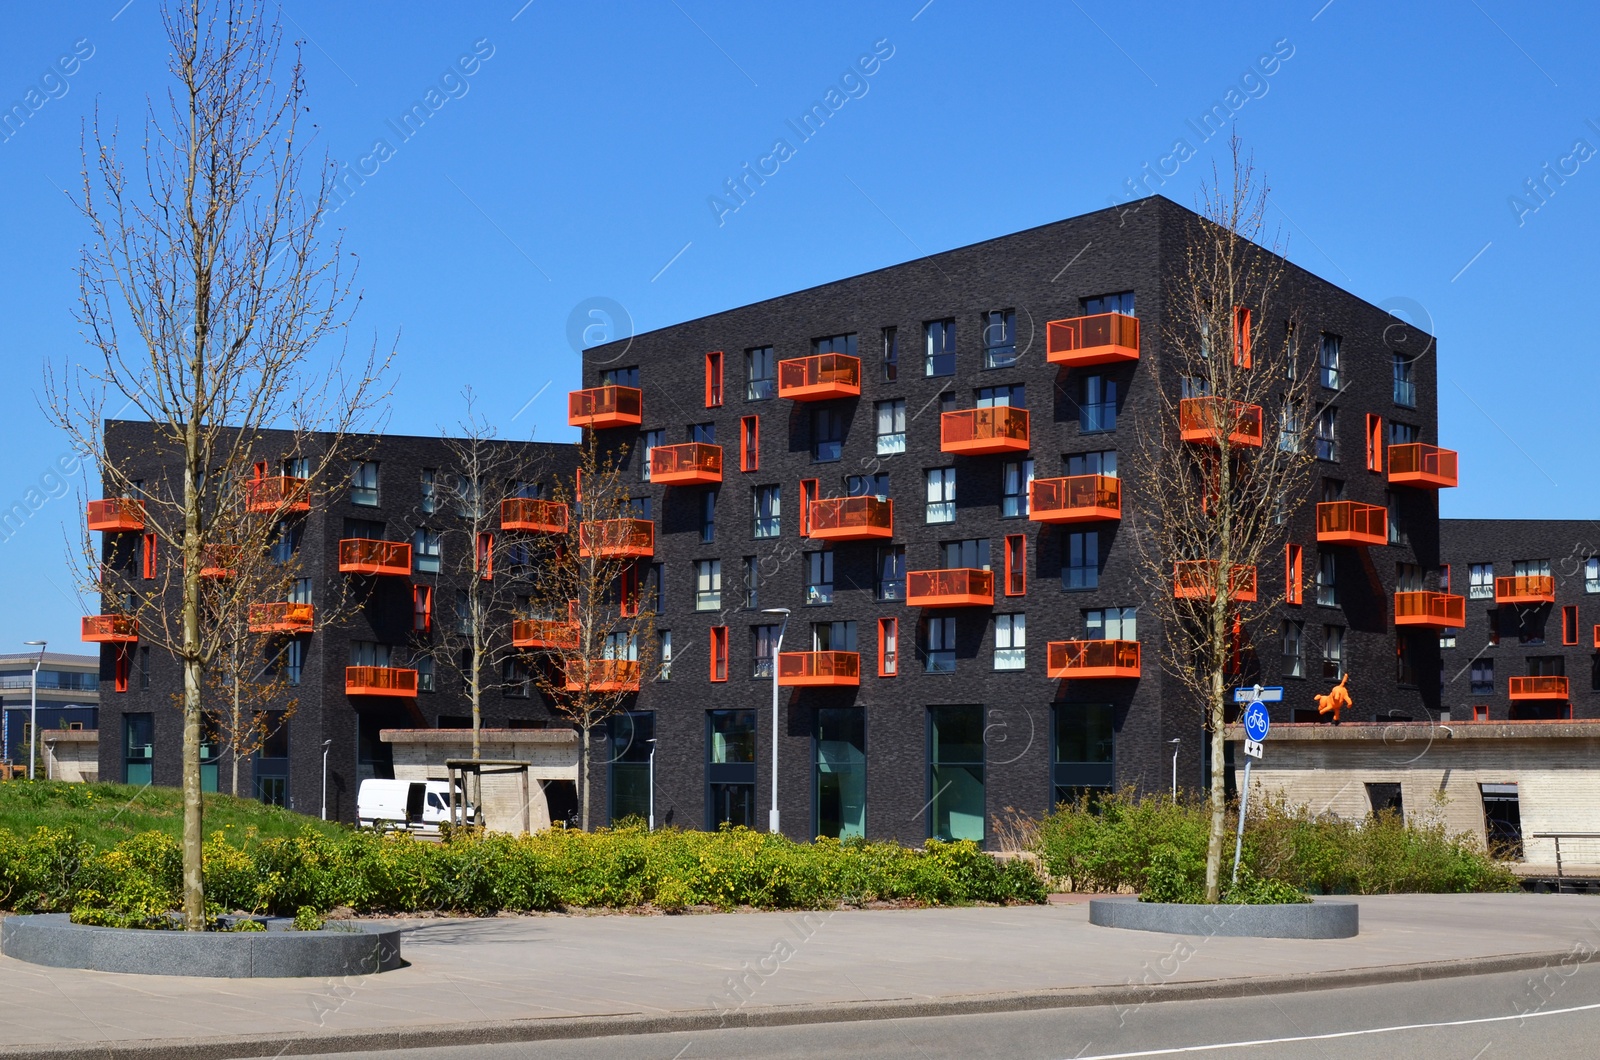 Photo of Exteriorbeautiful modern residential complex on sunny day